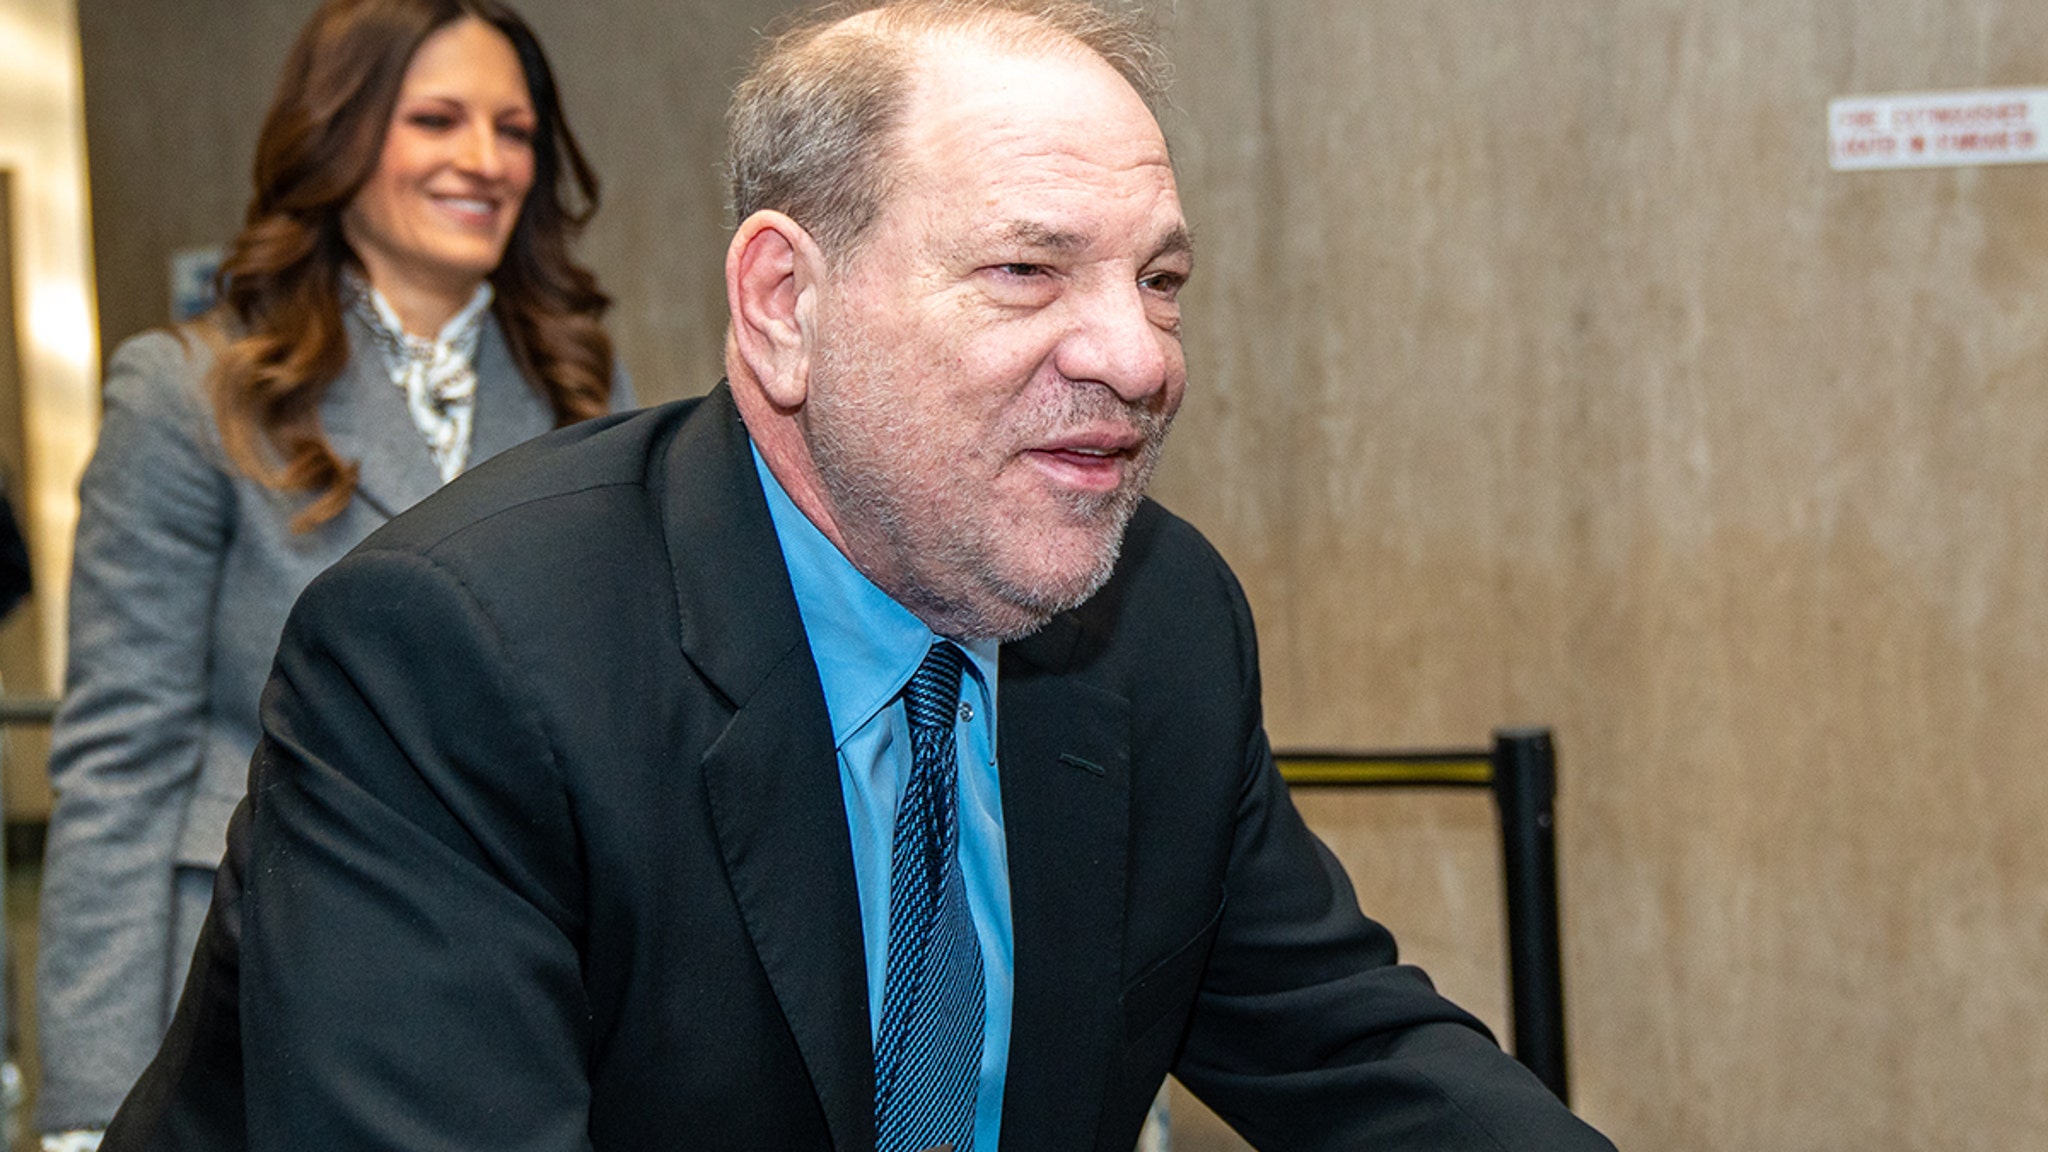 Harvey Weinstein Cheerful, Tearful After NYC Rape Conviction Overturned